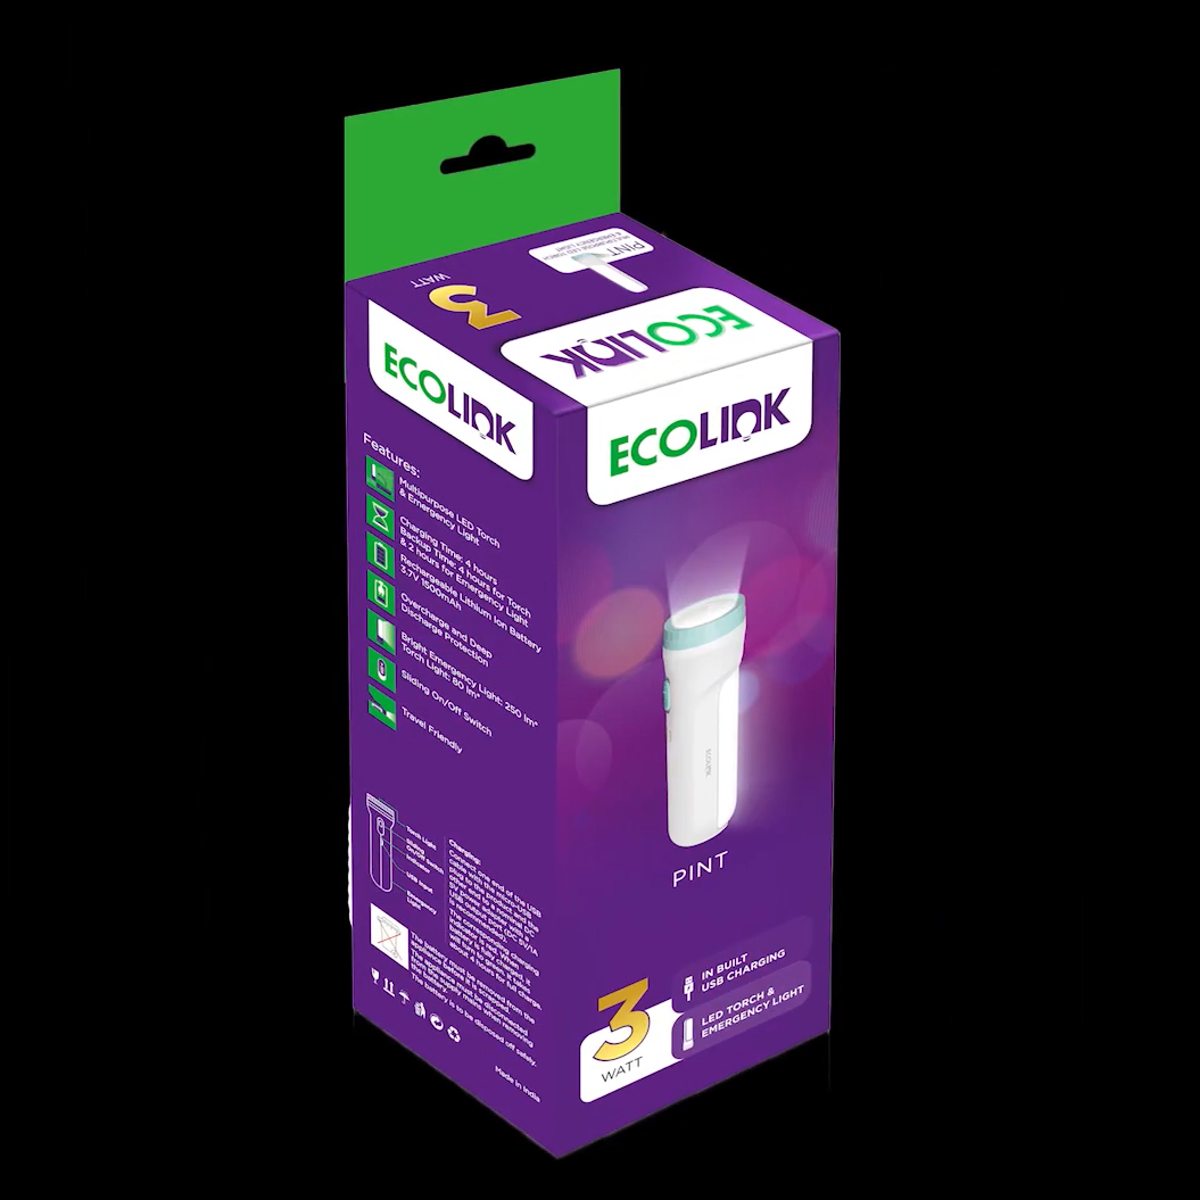 EcoLink Pint LED Torch & Table Lamp